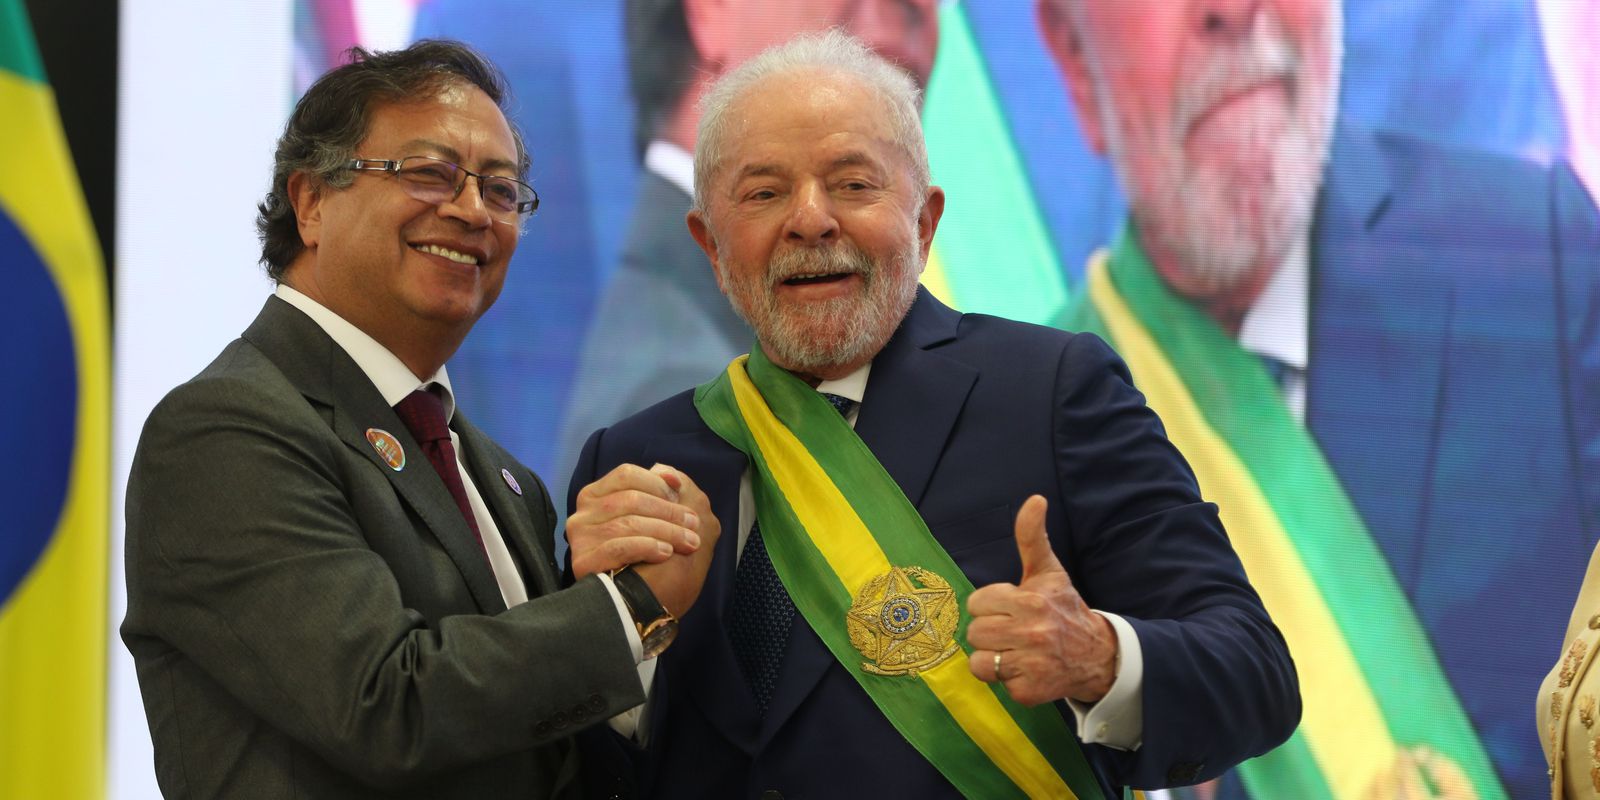 In Planalto, Lula receives greetings from foreign heads of state